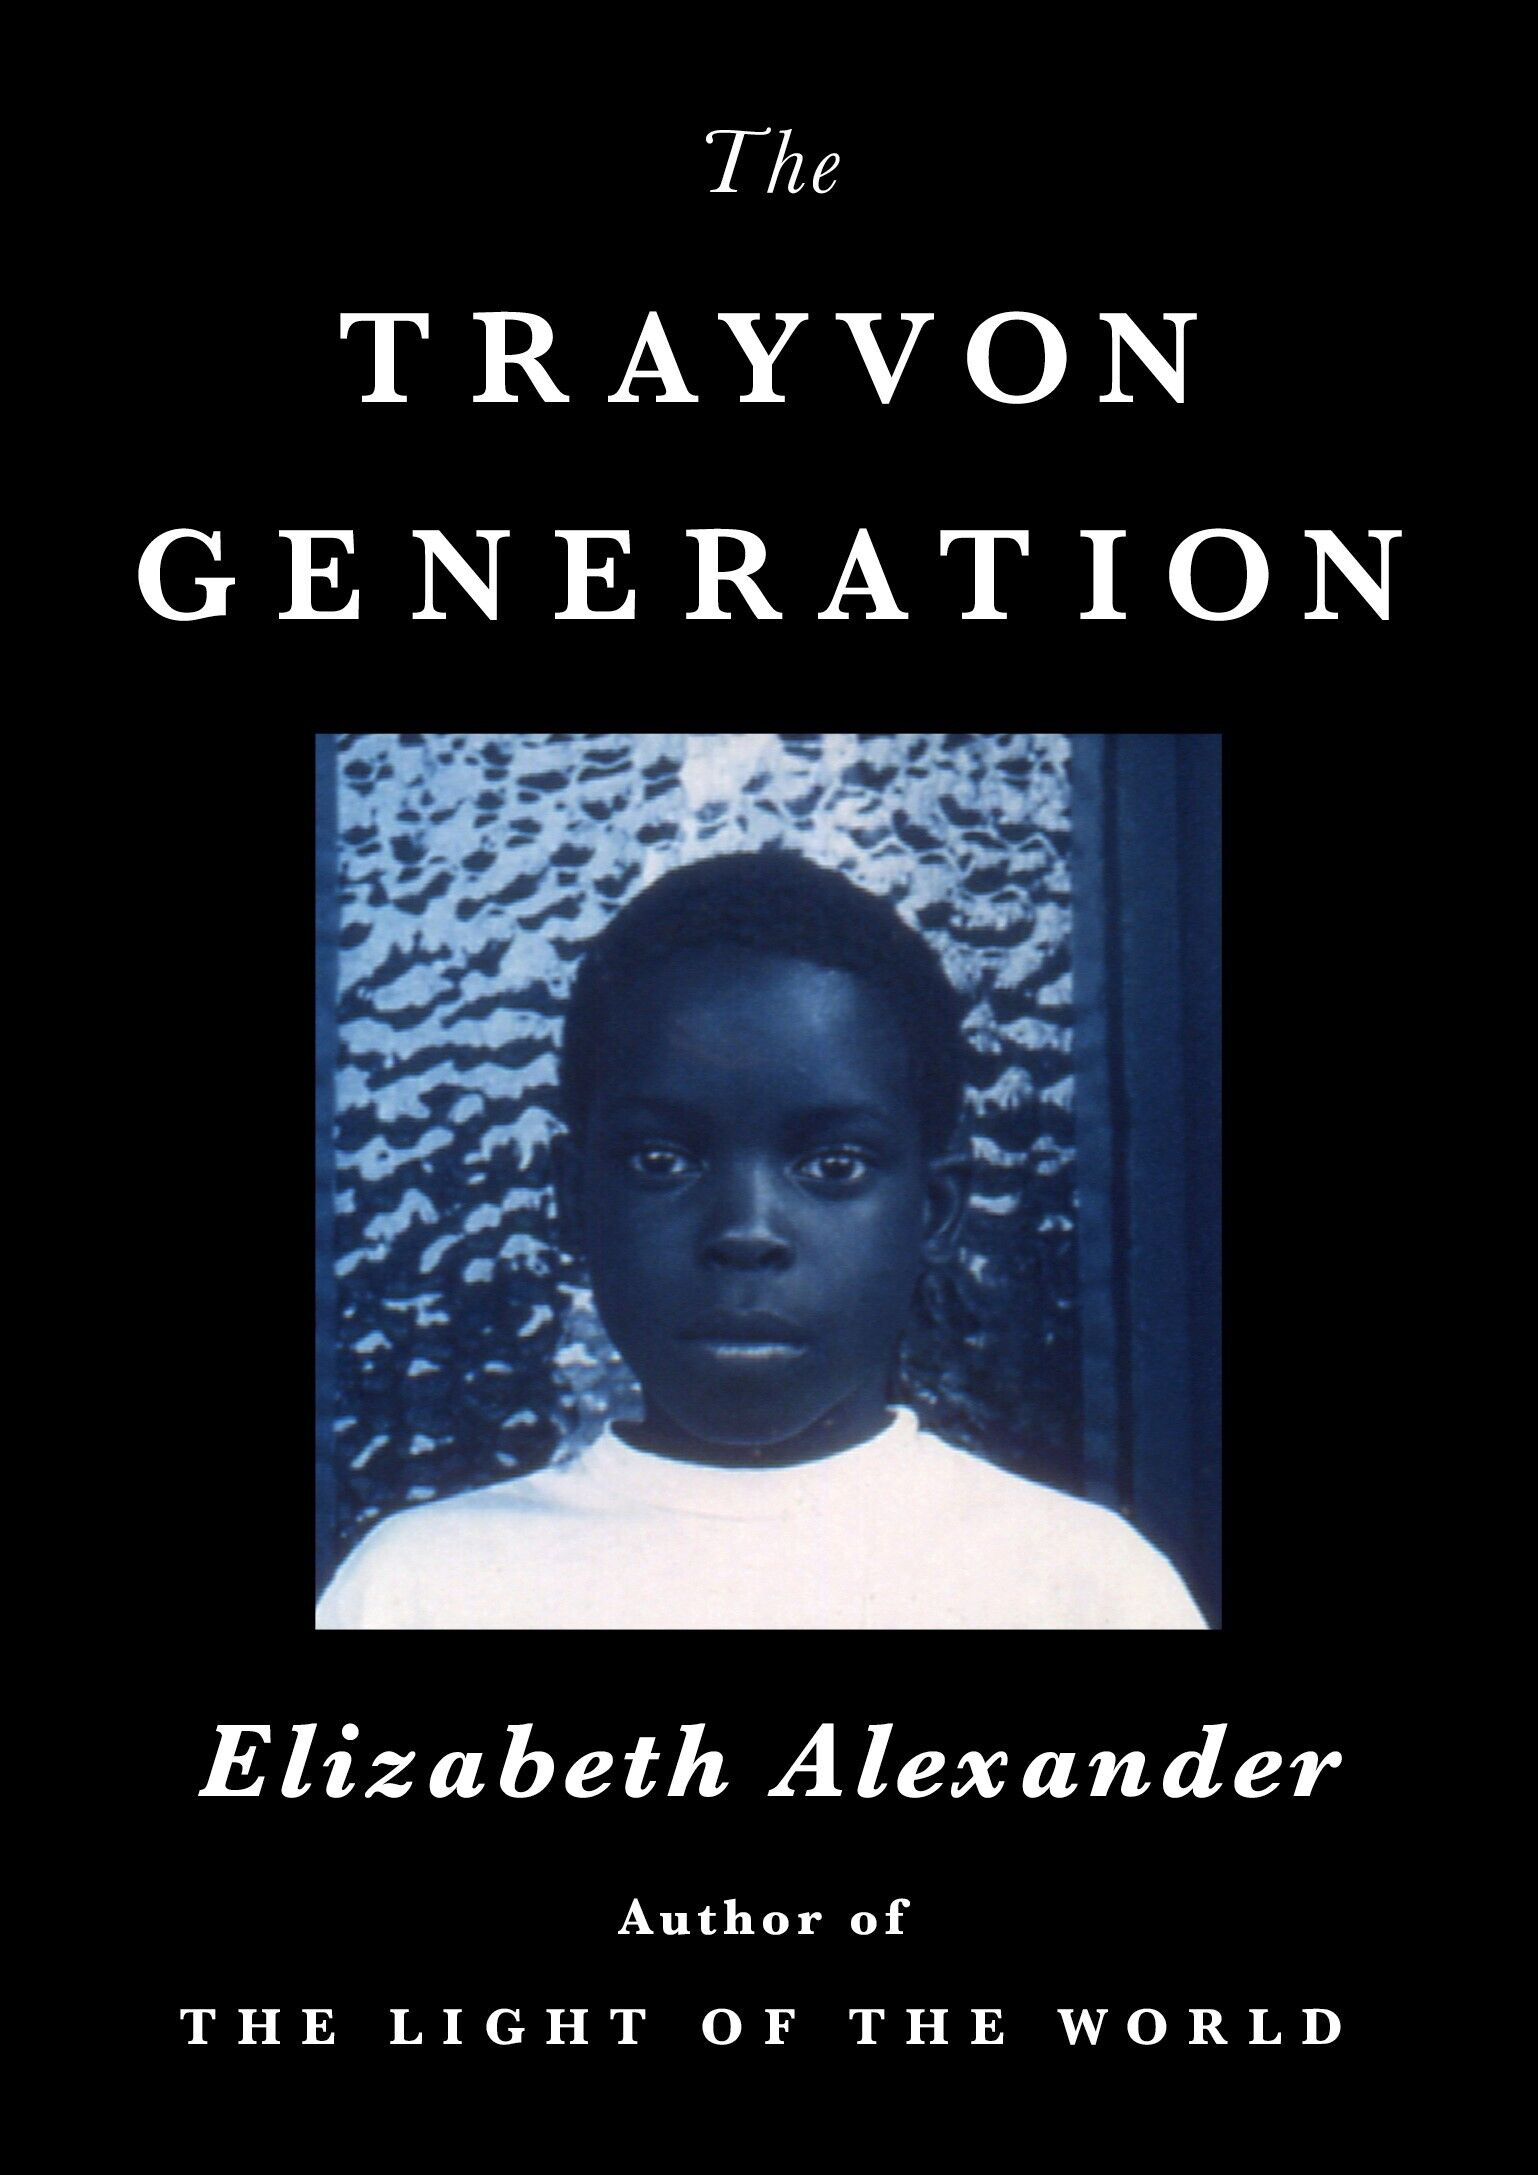 A book cover that features a blue-hued portrait of a young, Black boy with the title The Trayvon Generation placed above the photo.